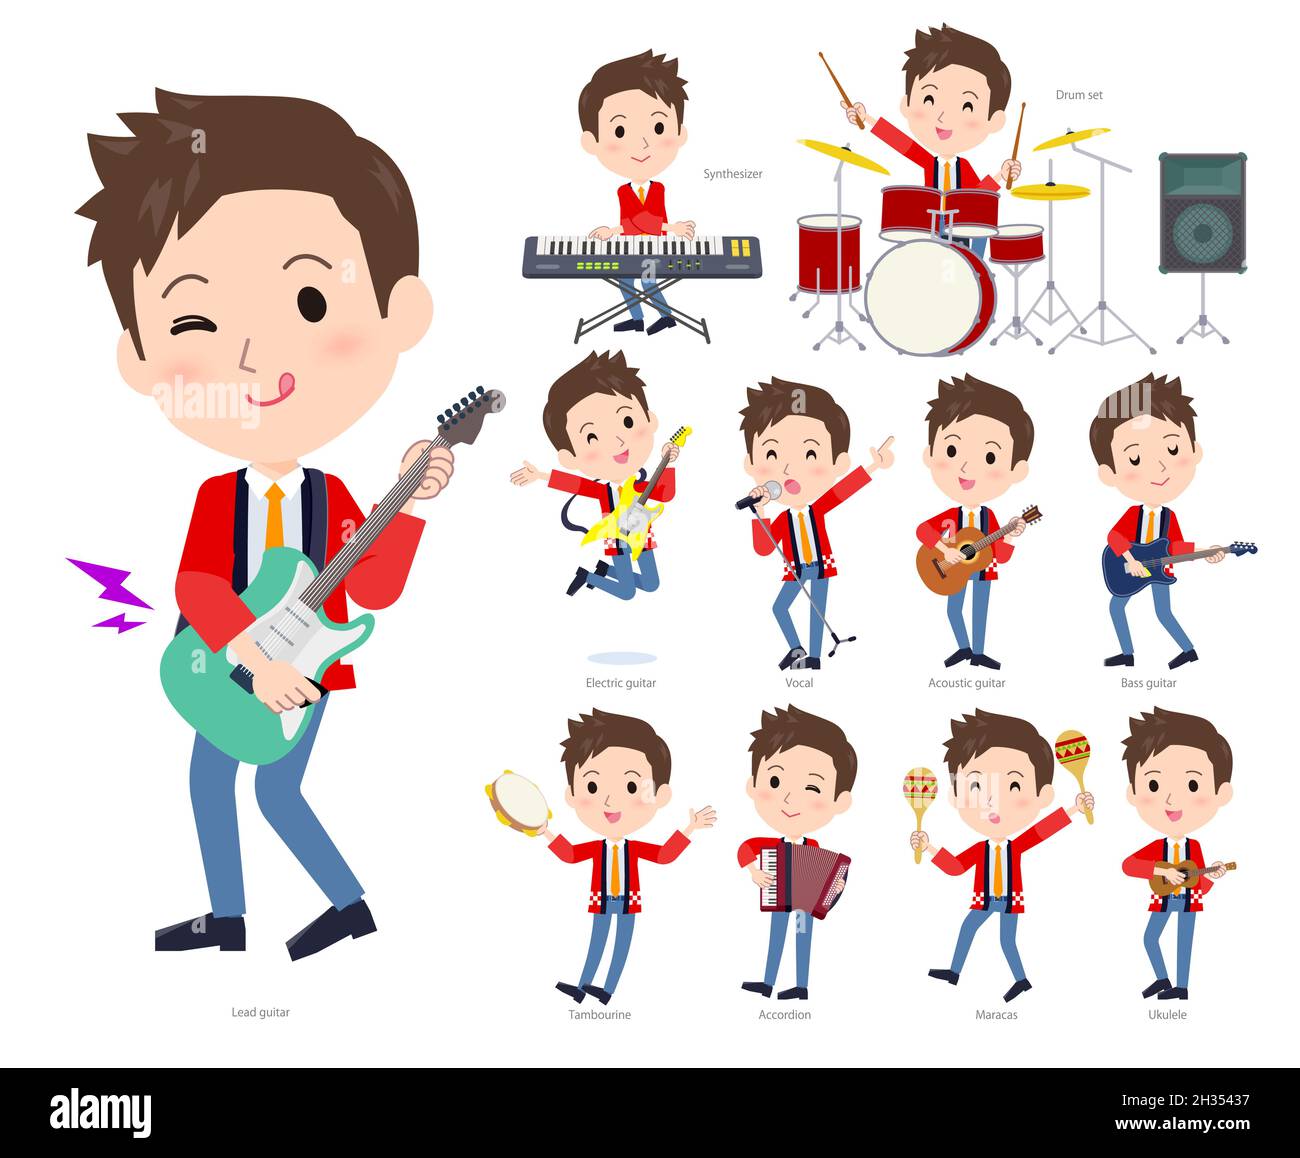 A set of wearing a happi coat man playing rock 'n' roll and pop music.It's vector art so easy to edit. Stock Vector